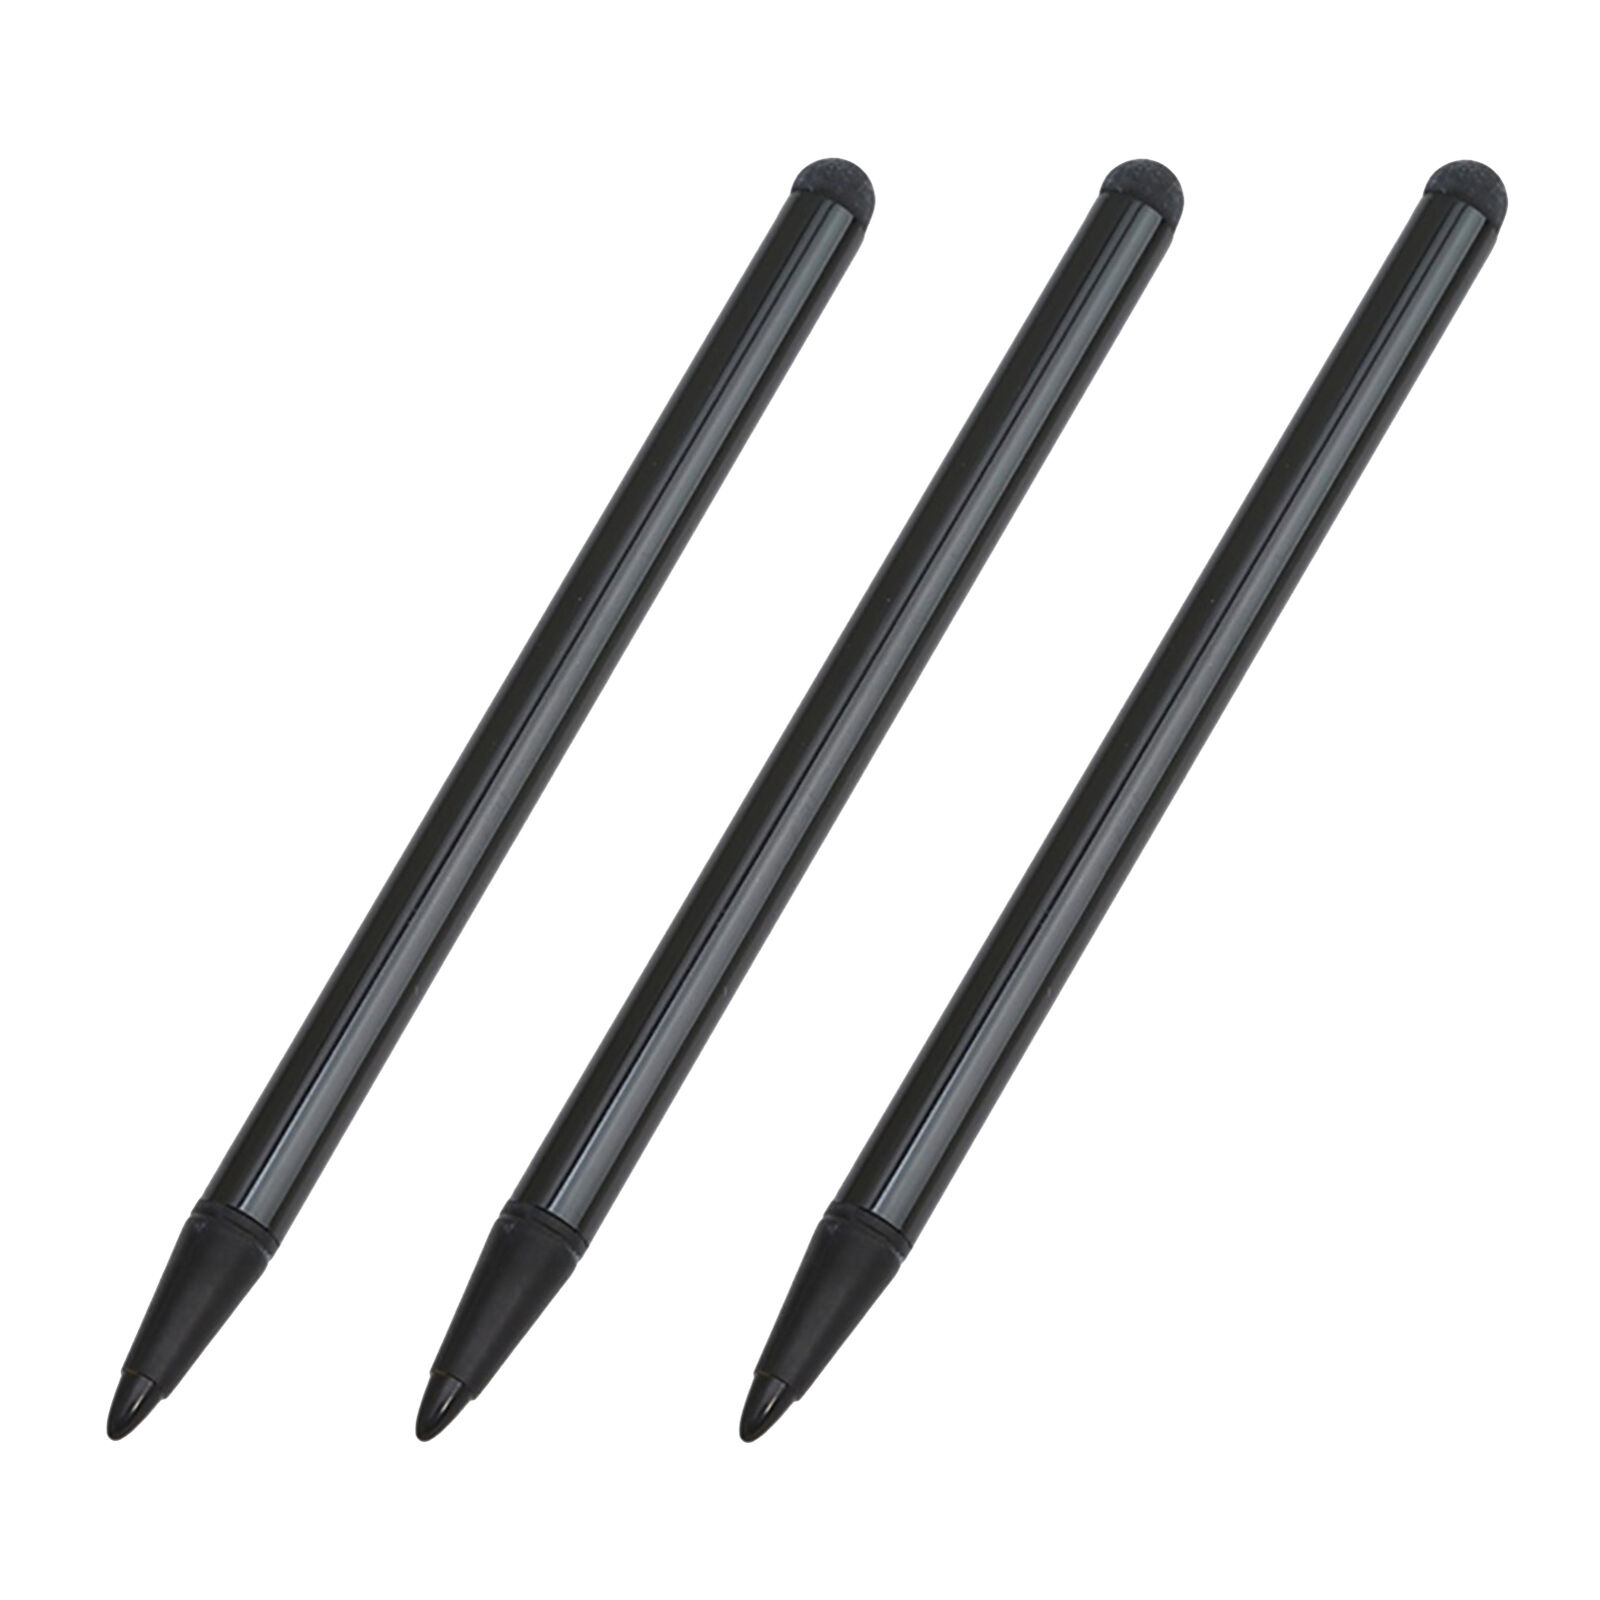 3PCS Stylus Pen for Touch Screens Tablet Capacitive Stylist Pen for Cell Phone